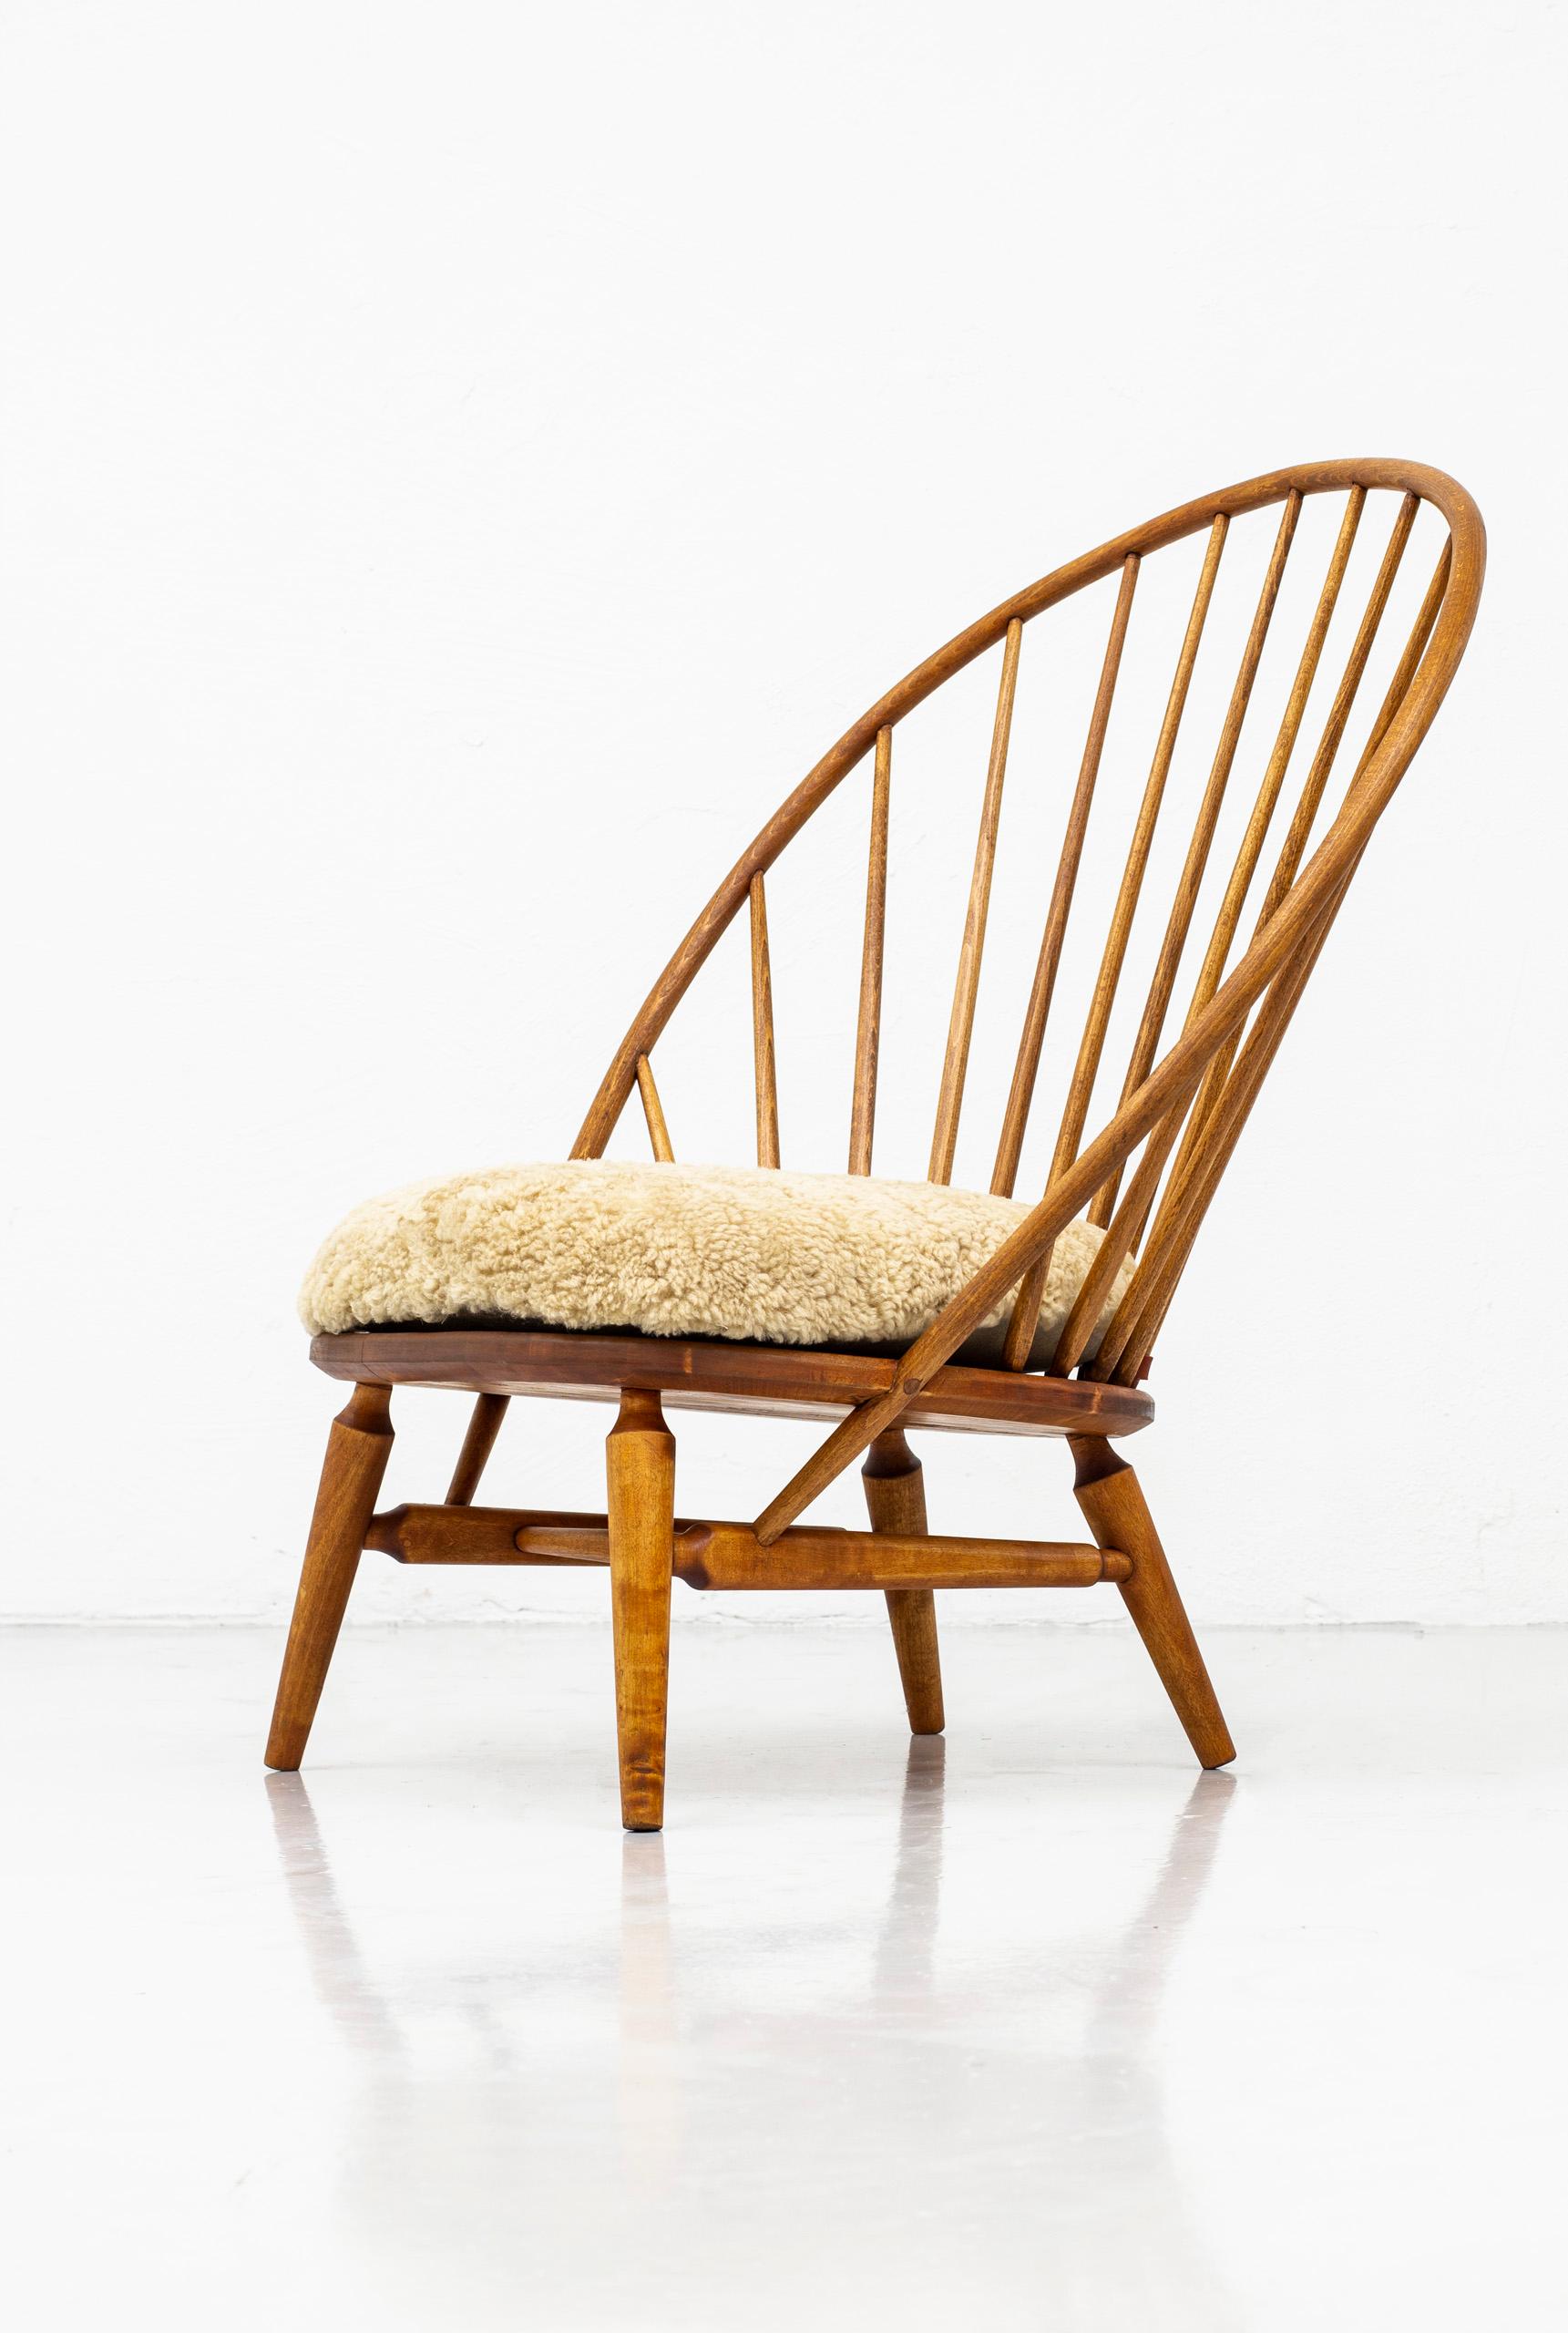 Lounge Chair with Sheep Skin Seat by Engström & Myrstrand, Sweden, 1950s 1